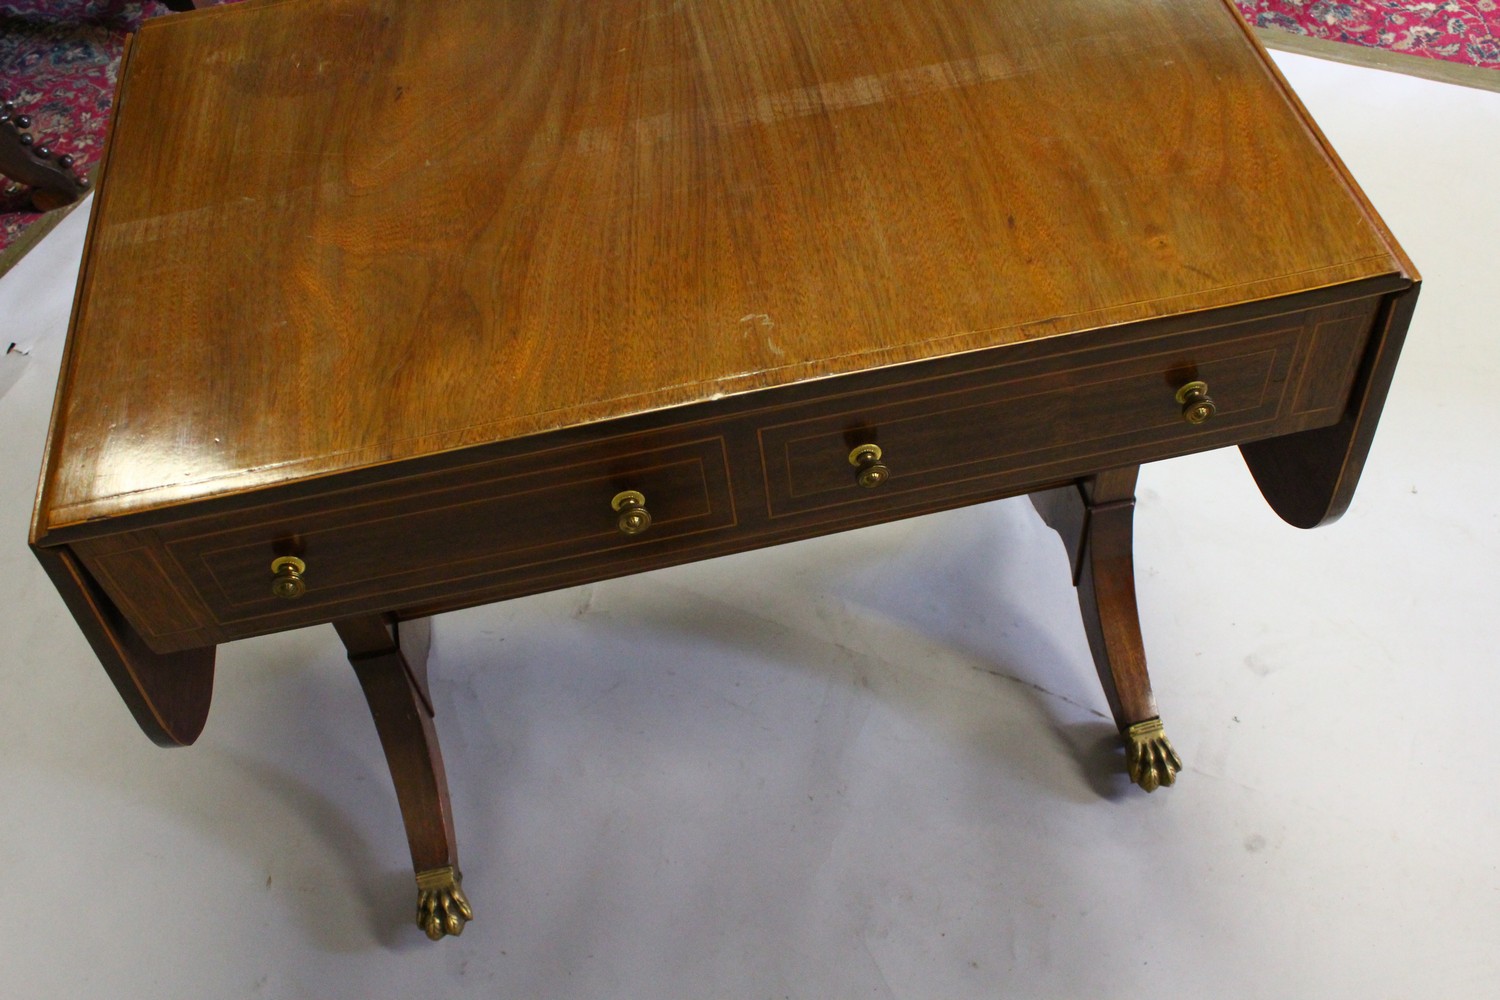 A GEORGIAN STYLE MAHOGANY INLAID SOFA TABLE, with folding flap, two small drawers, on end supports - Image 5 of 11